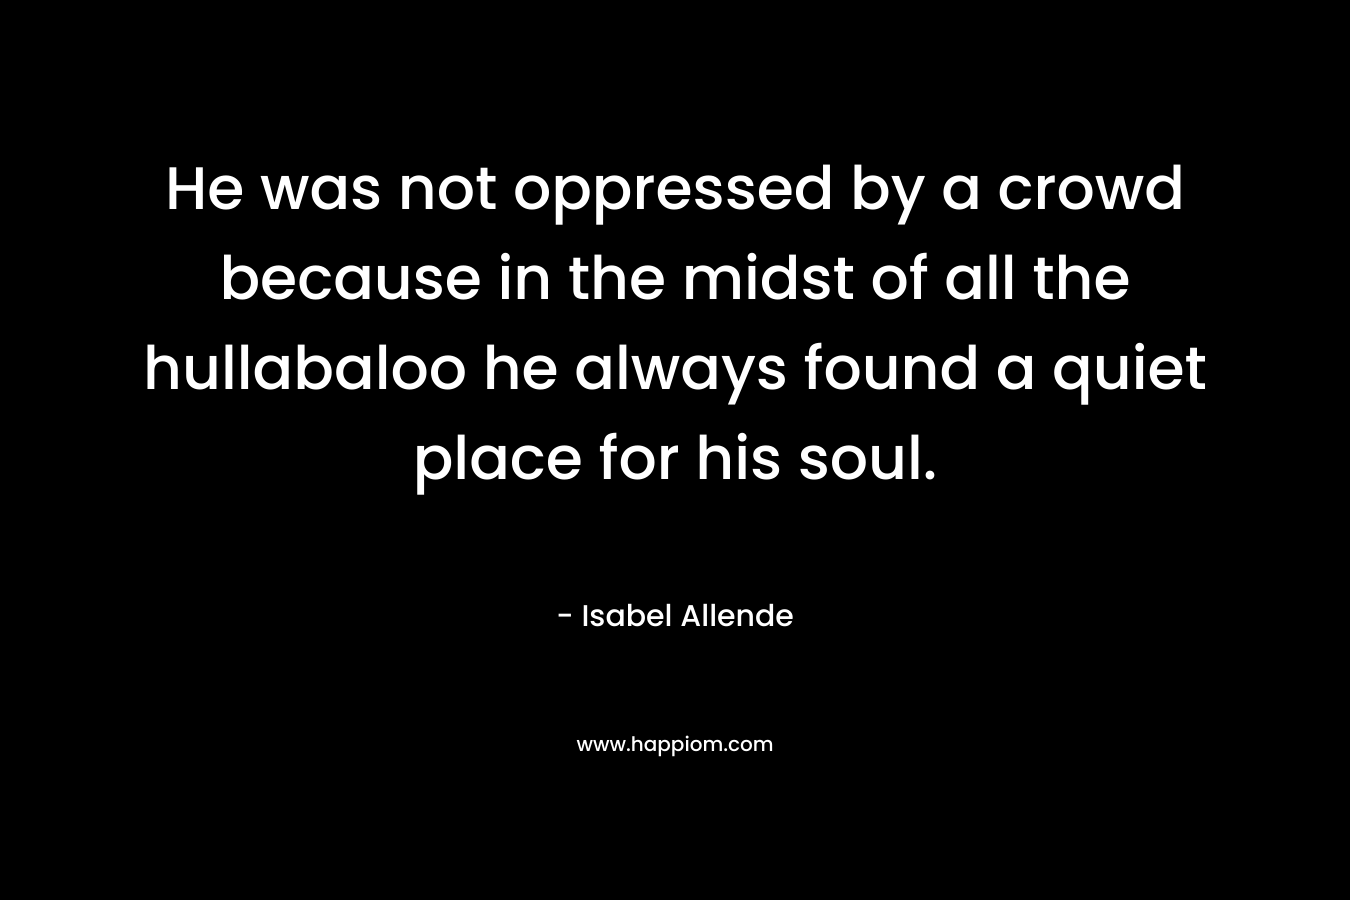 He was not oppressed by a crowd because in the midst of all the hullabaloo he always found a quiet place for his soul.  – Isabel Allende